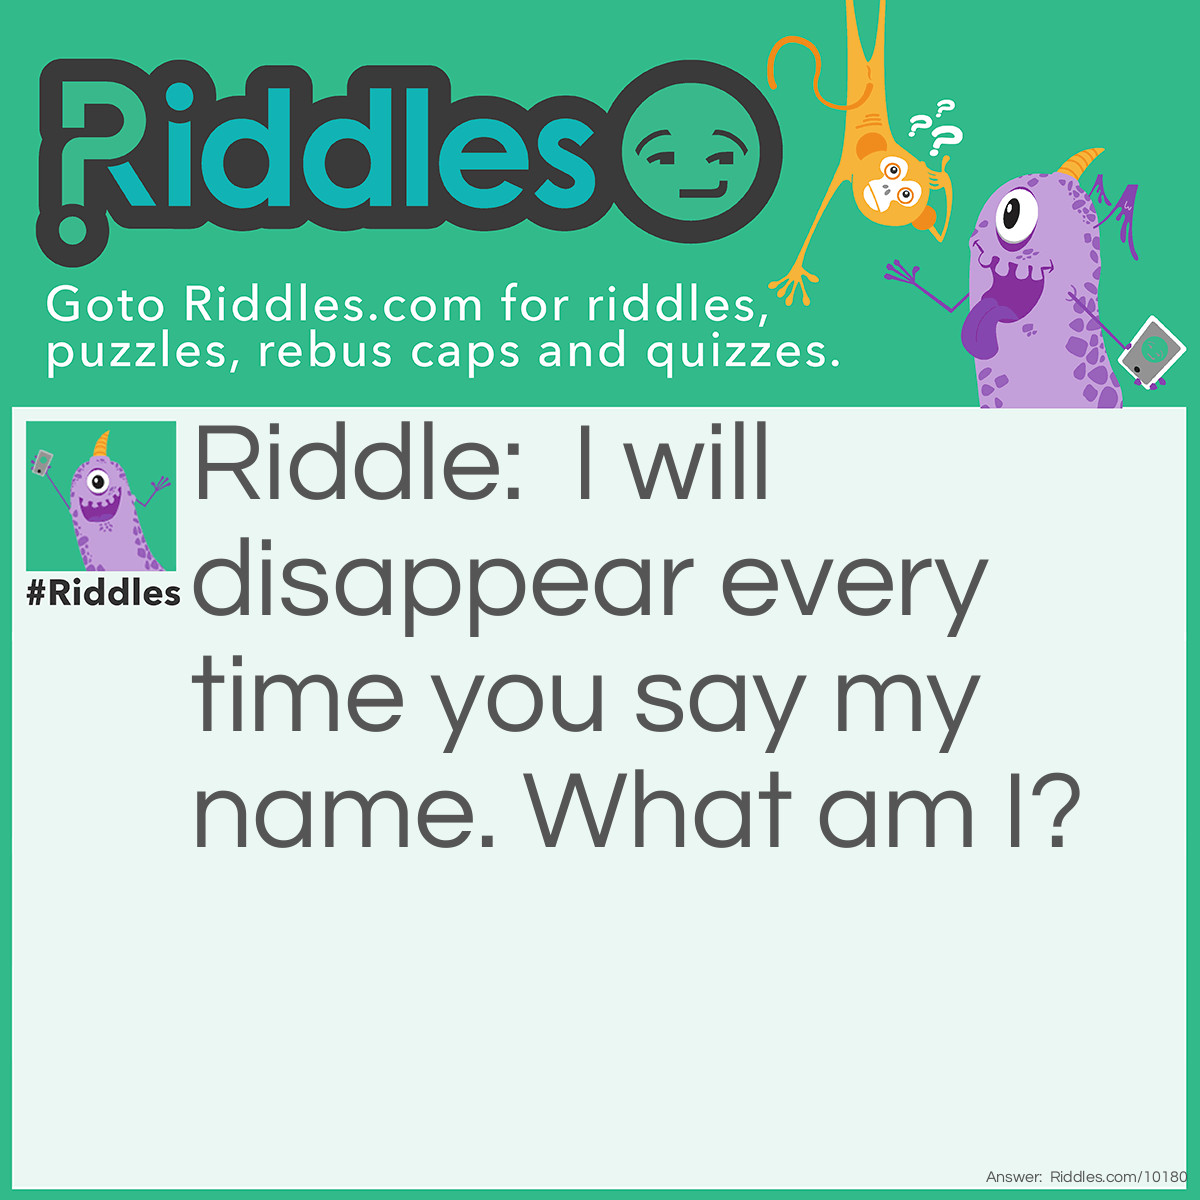 Riddle: I will disappear every time you say my name. What am I? Answer: Silence.